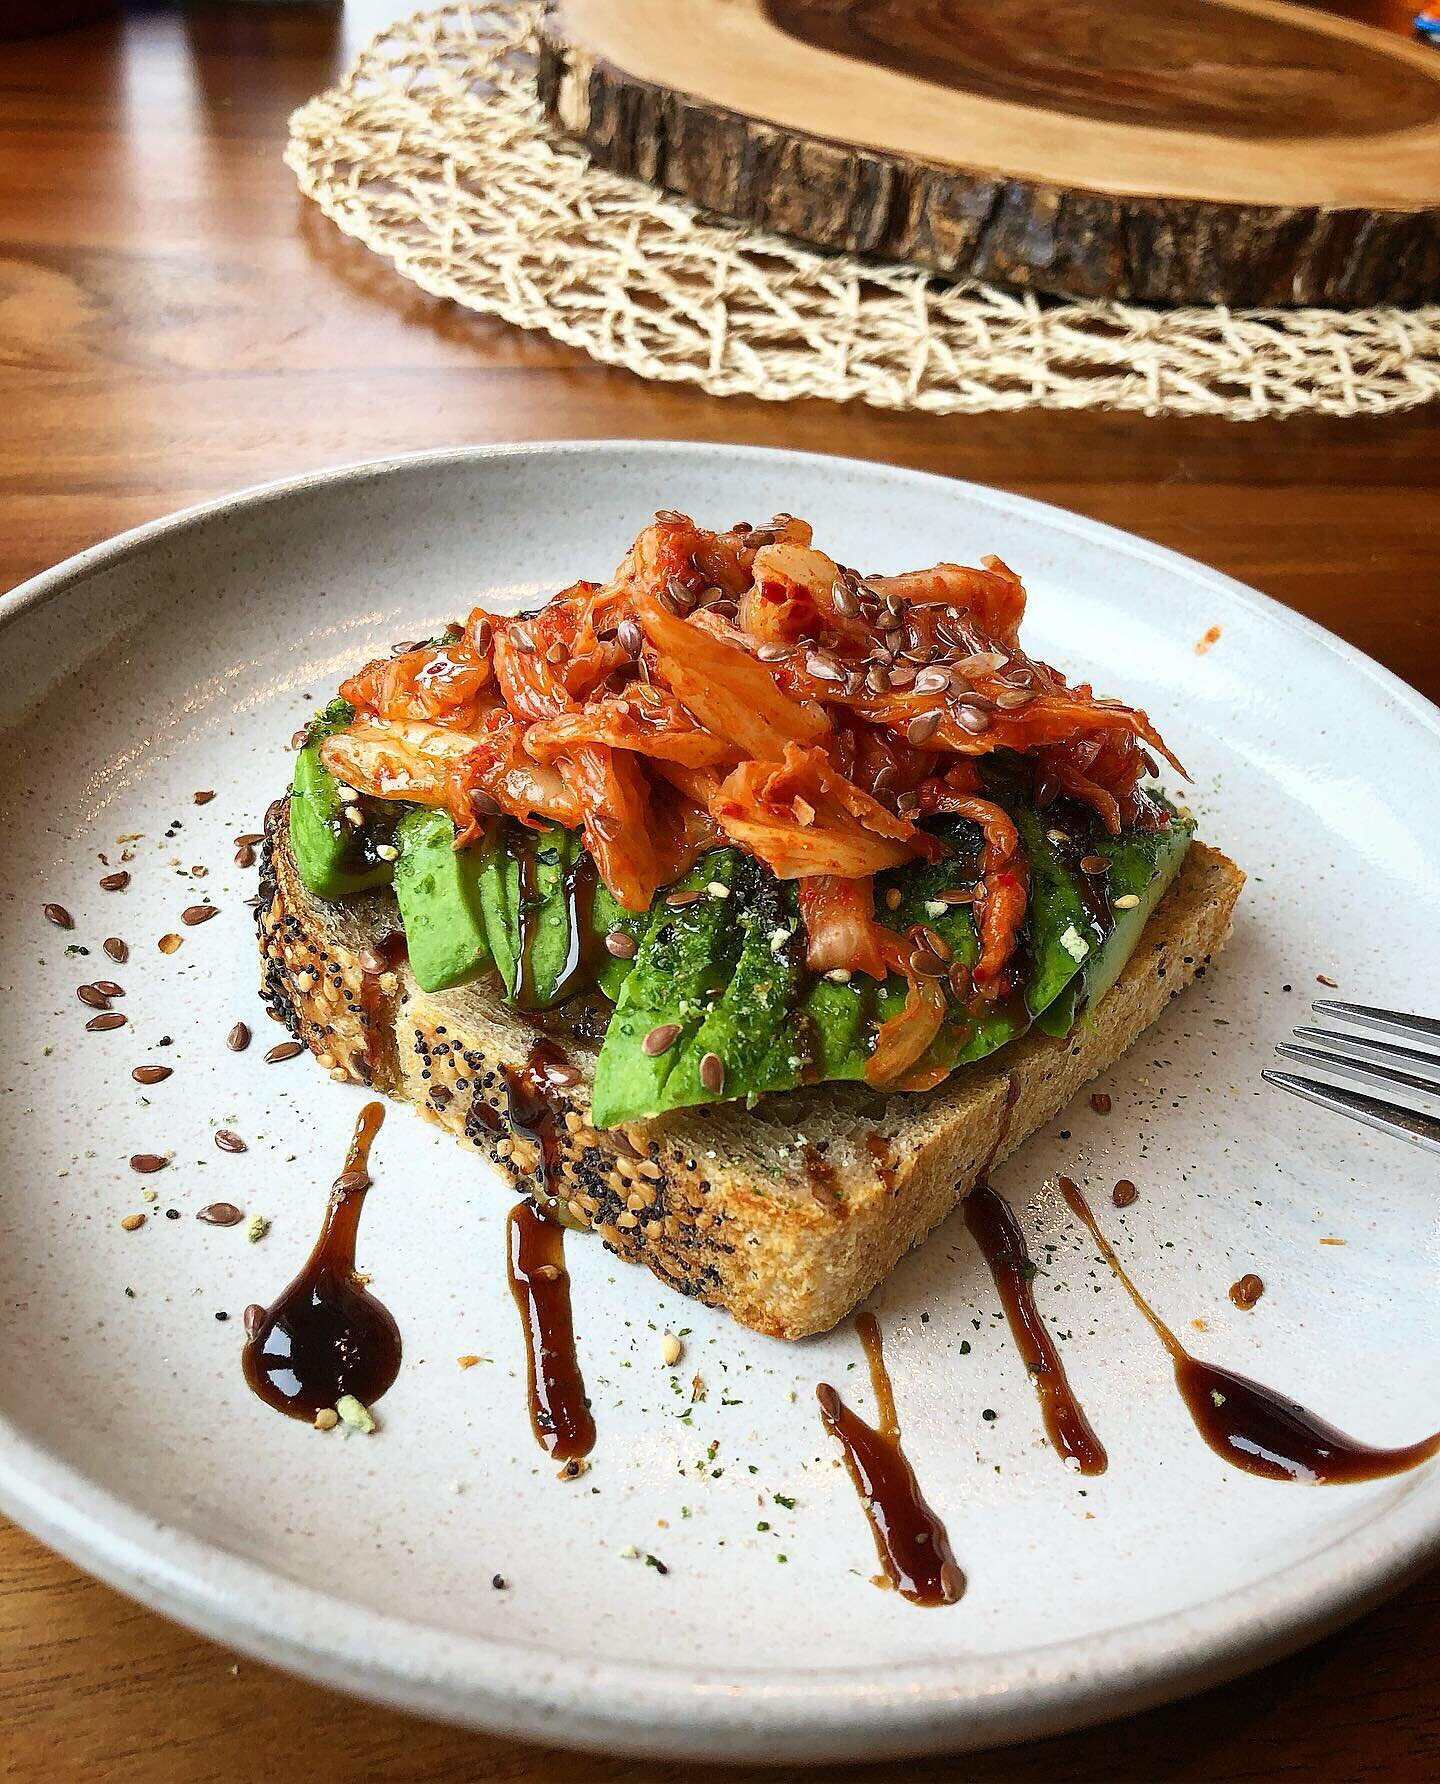 Multiseed toast with avocado, @trybachans Japanese bbq sauce, furikake, kimchee, sesame oil, and flax seeds - a simple healthy avocado toast for brekkie you can whip up fast! #toast #avocadotoast #kimchee #banchan #noms #breakfast